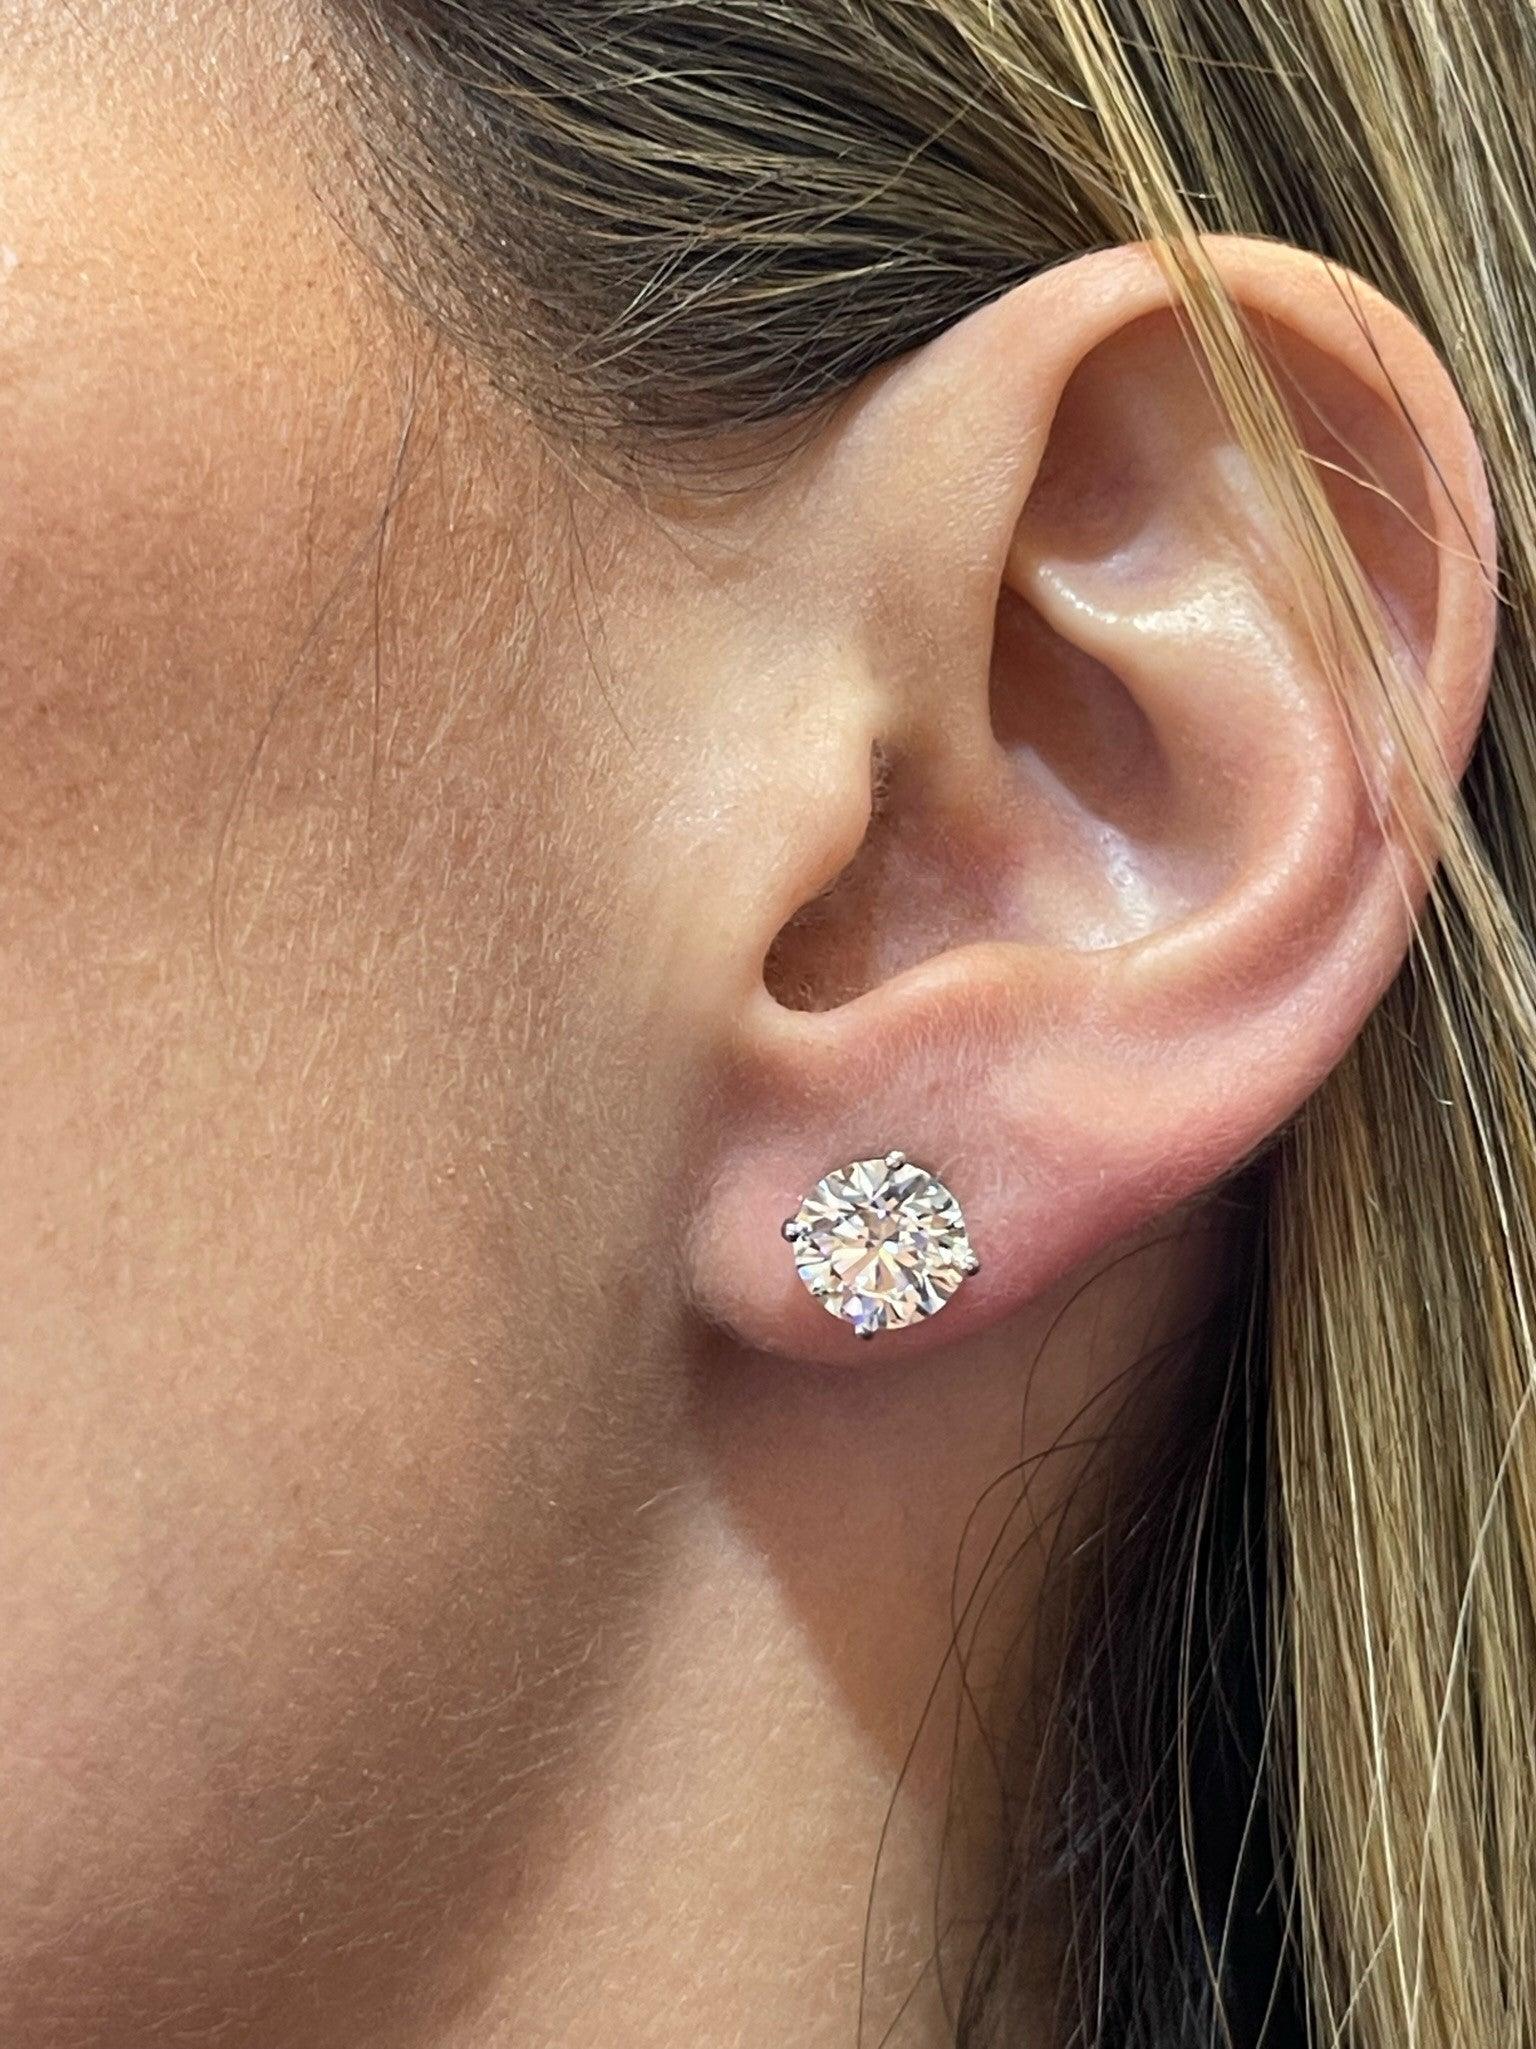 Classic Lab Grown Round Brilliant Cut Diamond Stud Earrings 14K Rose Gold / 5 ct Total (2.5 ct Each)